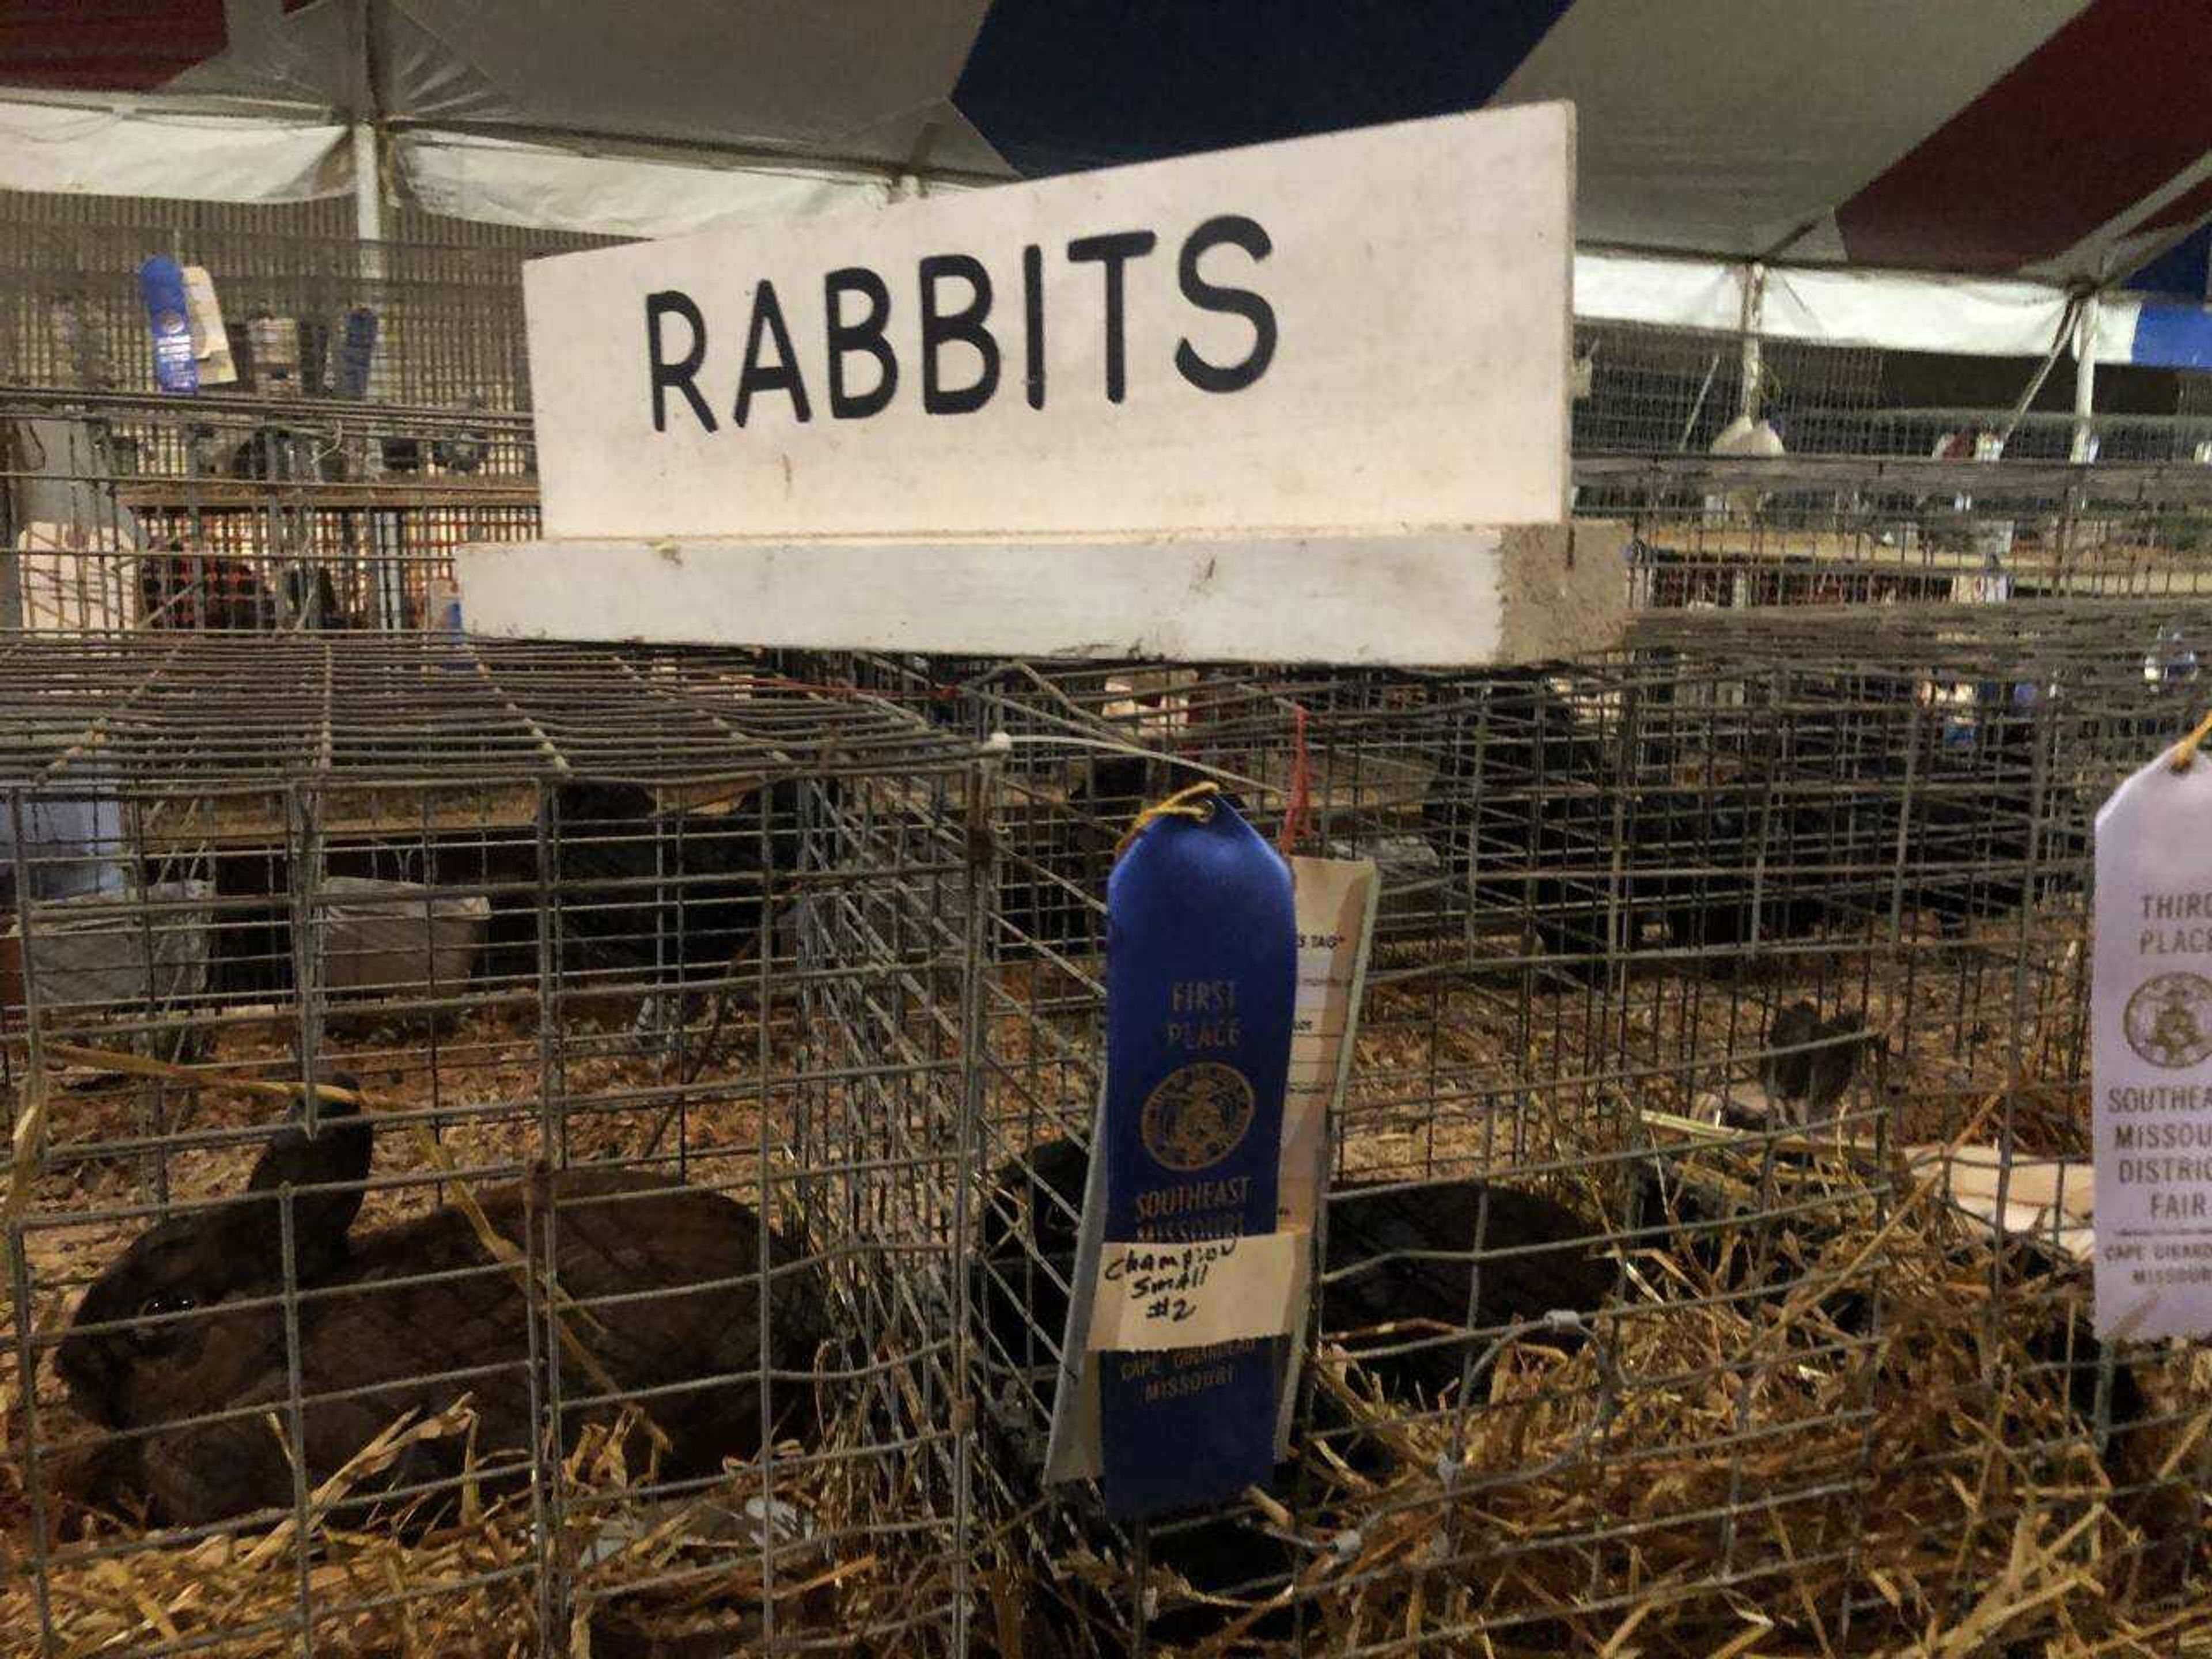 Two of many award winning rabbits sit on display the night of the Livestock Competitions and Judging event Sept. 12 in Cape Girardeau, Missouri.